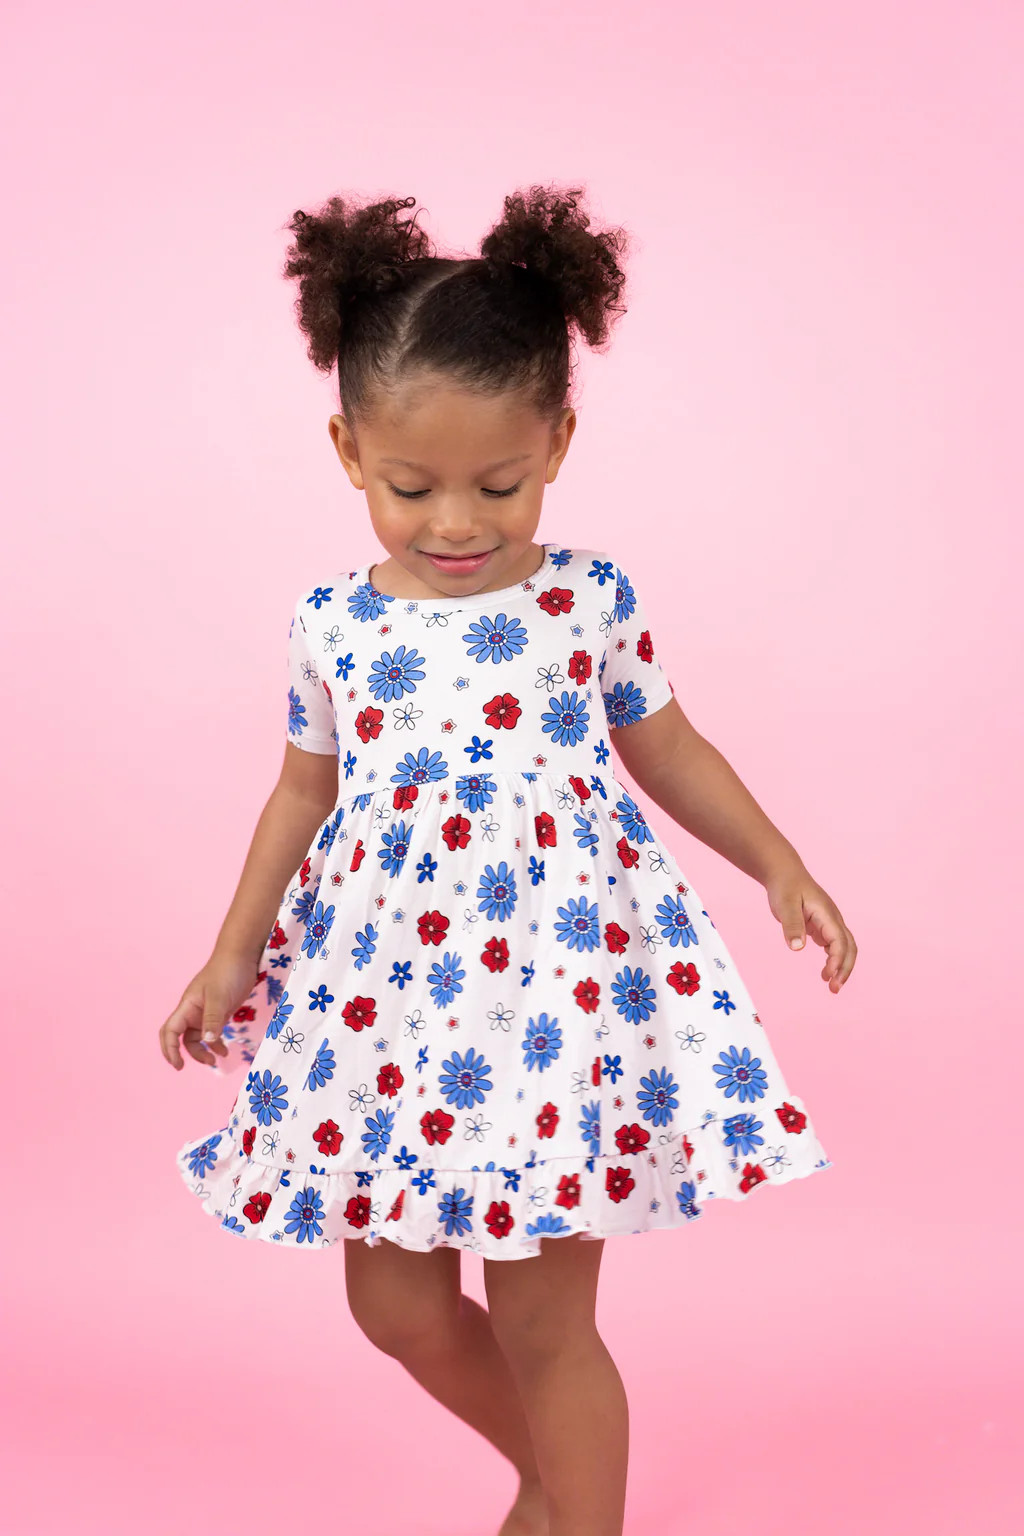 EXCLUSIVE FREEDOM BLOOMS DREAM RUFFLE DRESS | DREAM BIG LITTLE CO